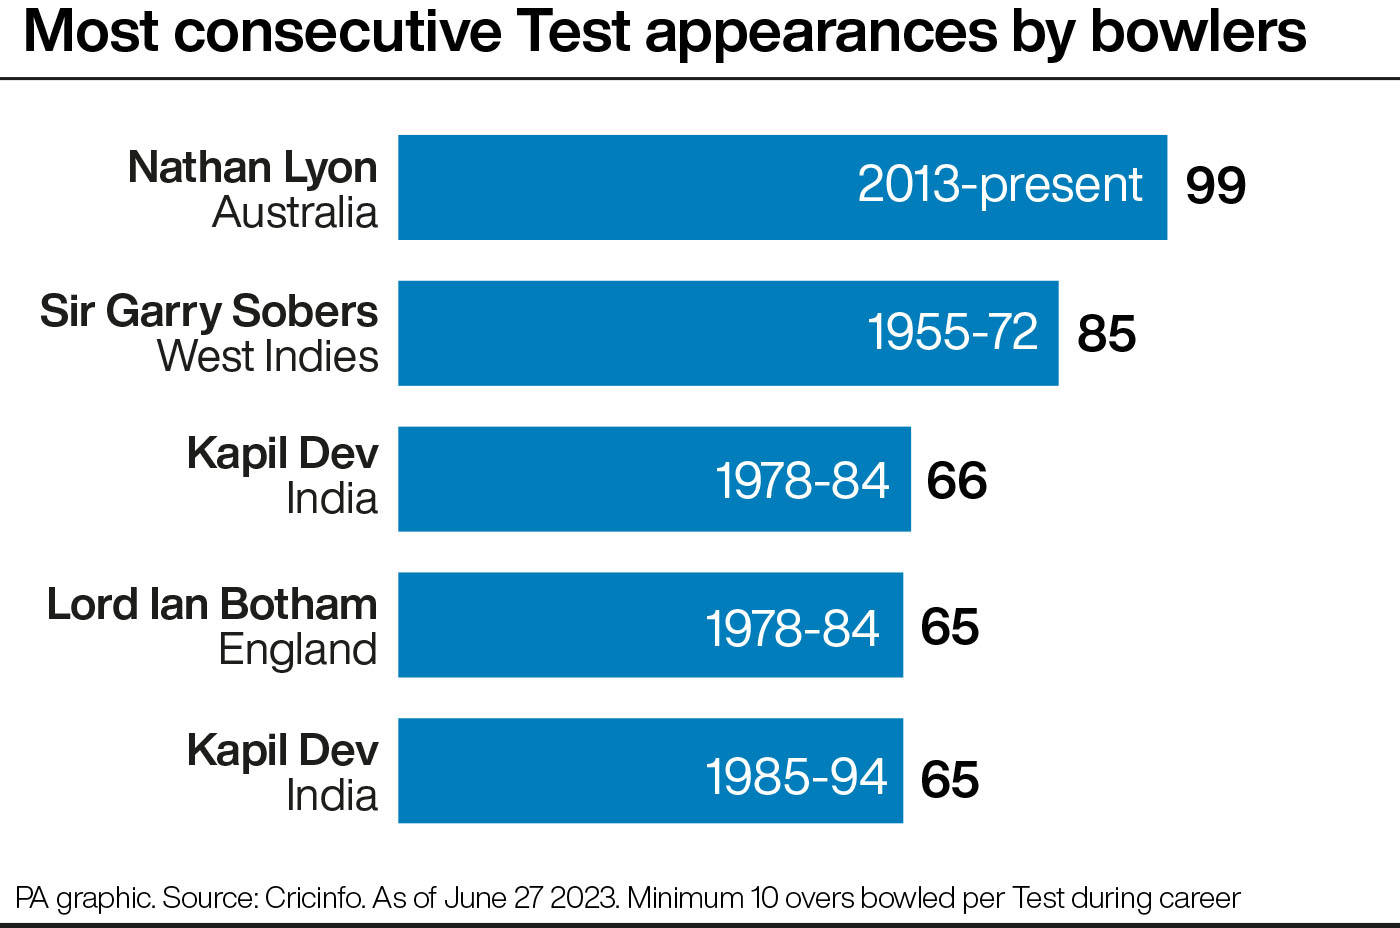 Most consecutive Test appearances by bowlers (graphic)